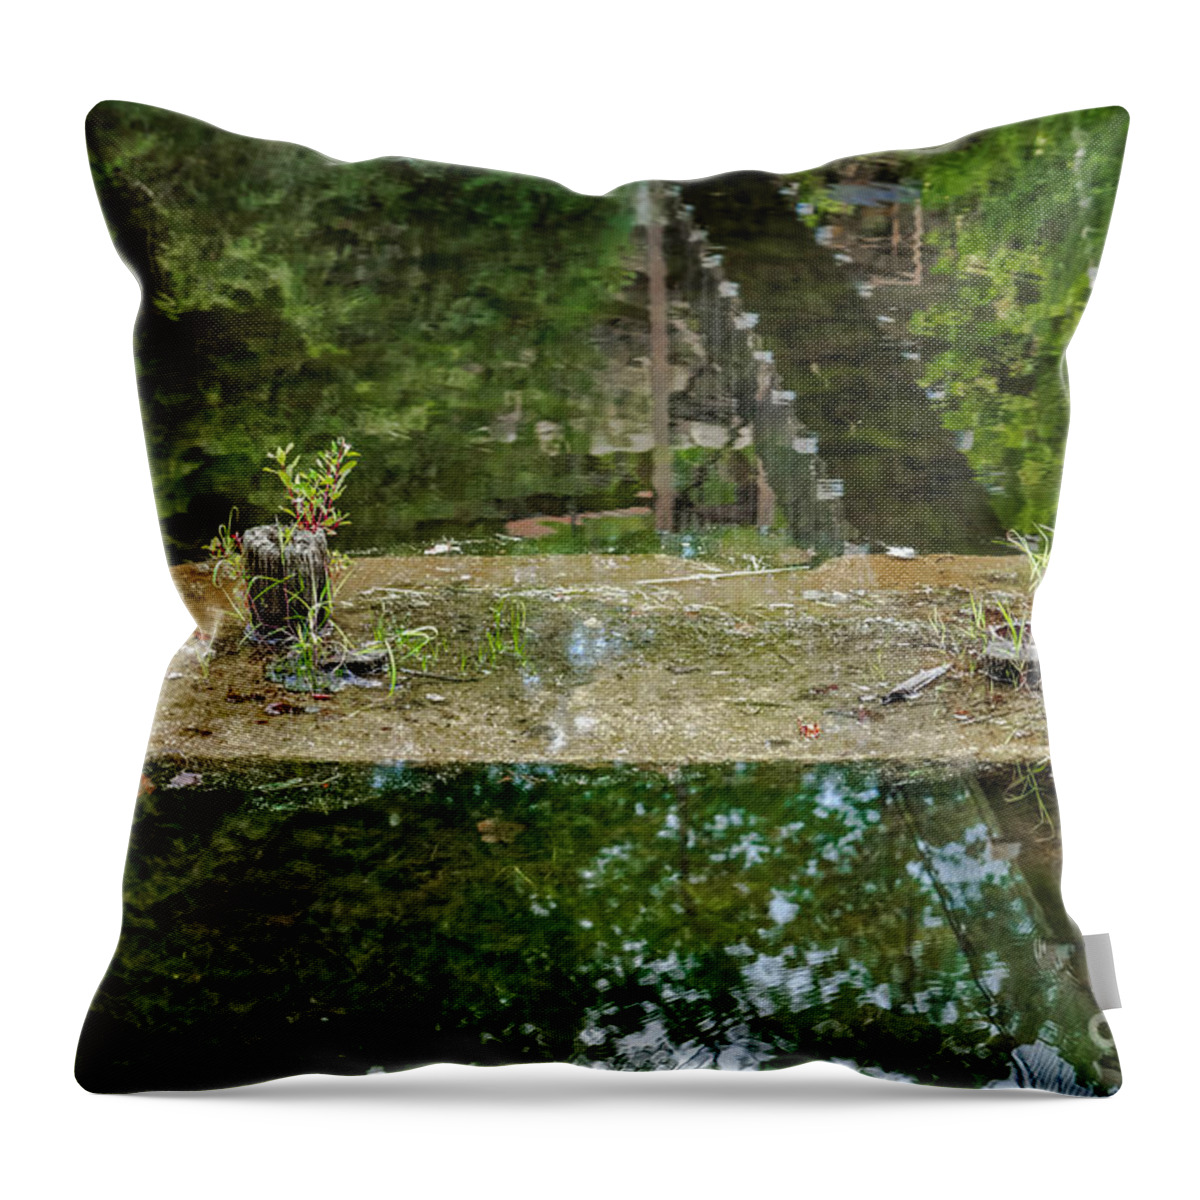 Reflection Throw Pillow featuring the photograph Reflection Of The Past by Paul Mashburn